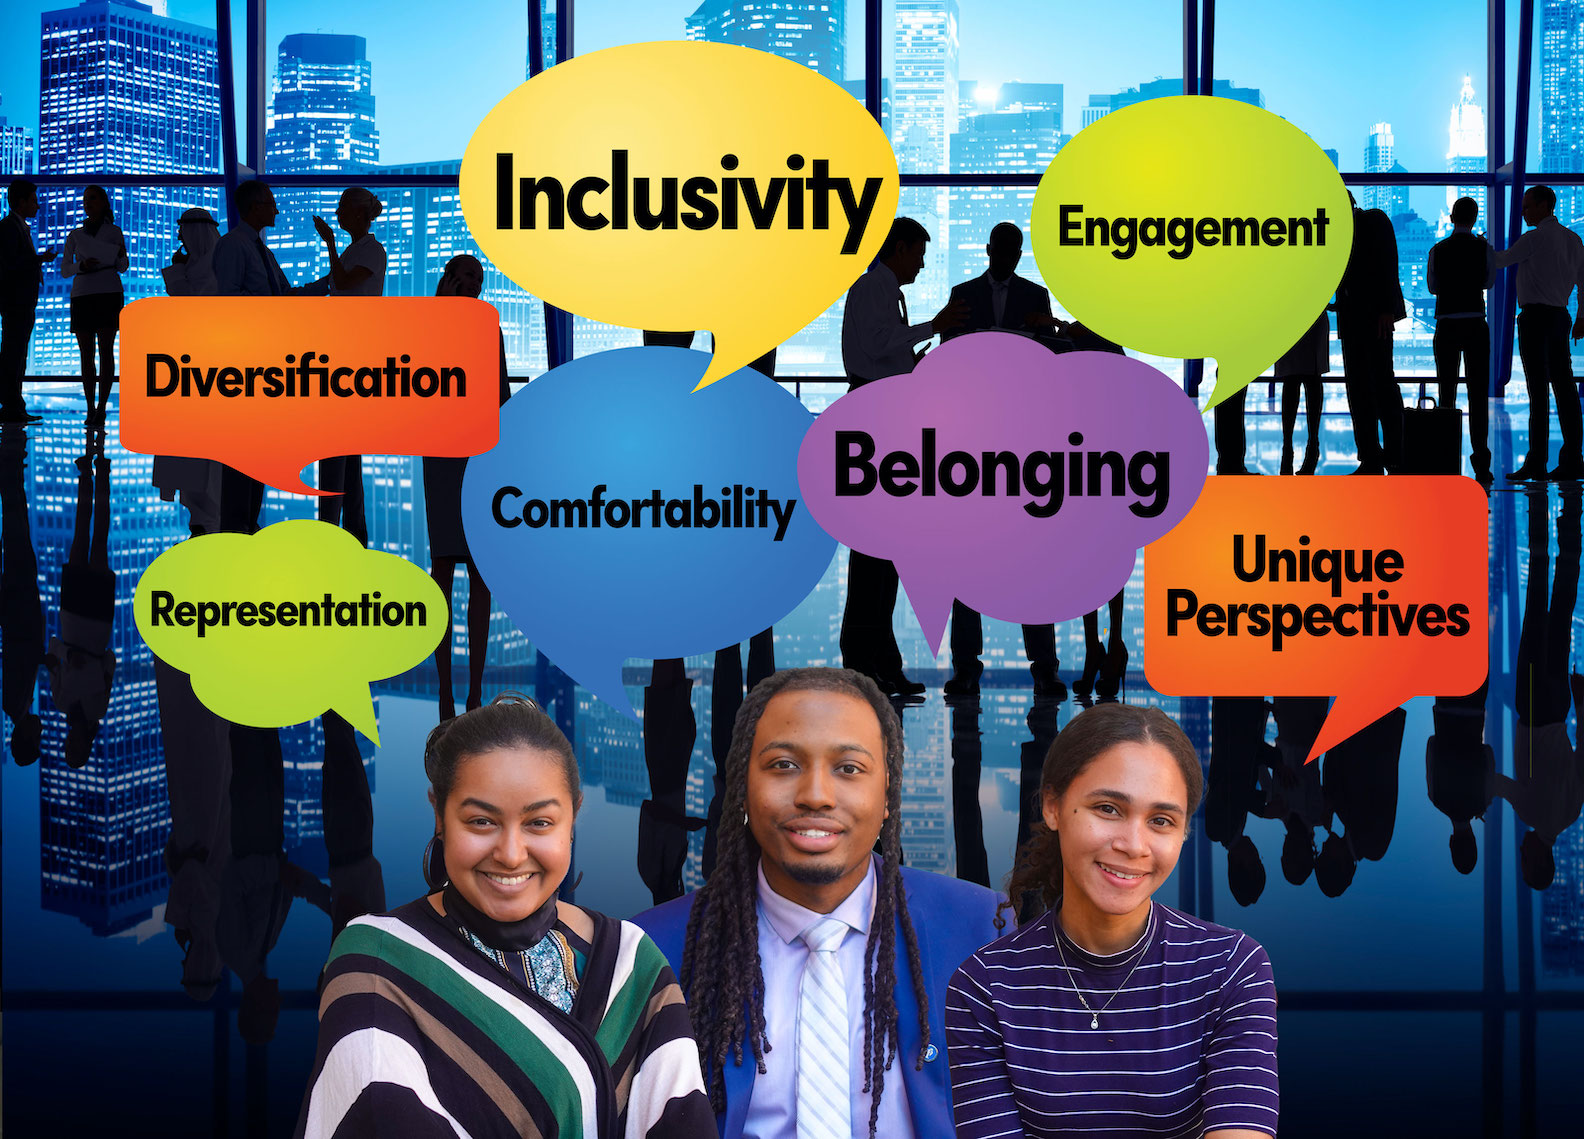 From left, Sonya A. Tareke, Malkijah Griffiths and Janelle Fore of Team Real Talk, which promotes diversity, equity and inclusion efforts within institutions through guided social discussion. (Photo illustration: Douglas Levere/image courtesy of the University at Buffalo)